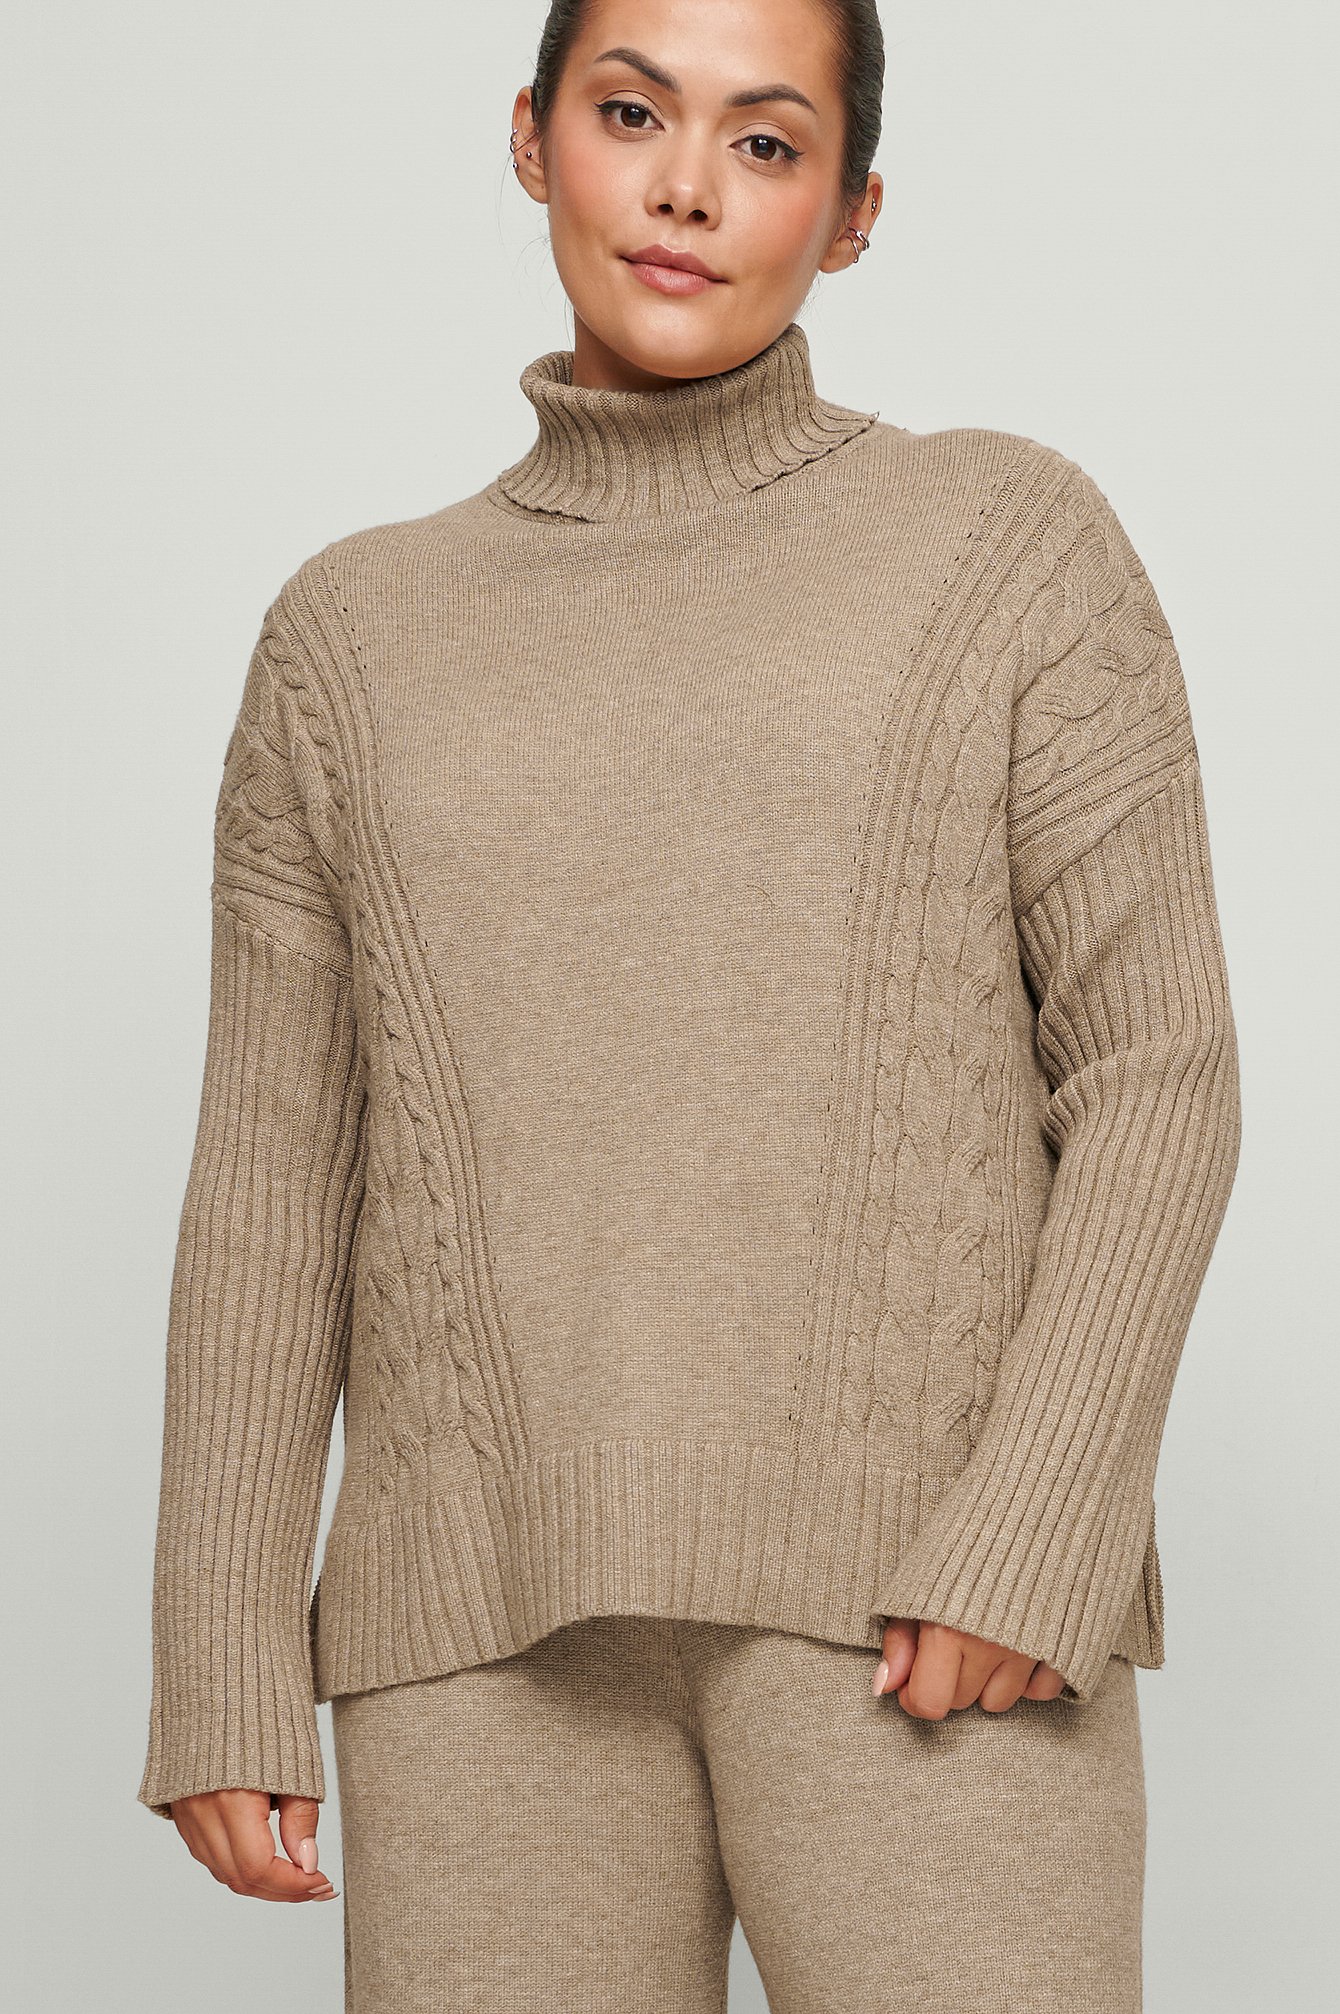 Beige Braided Knitted Turtle Neck Sweater